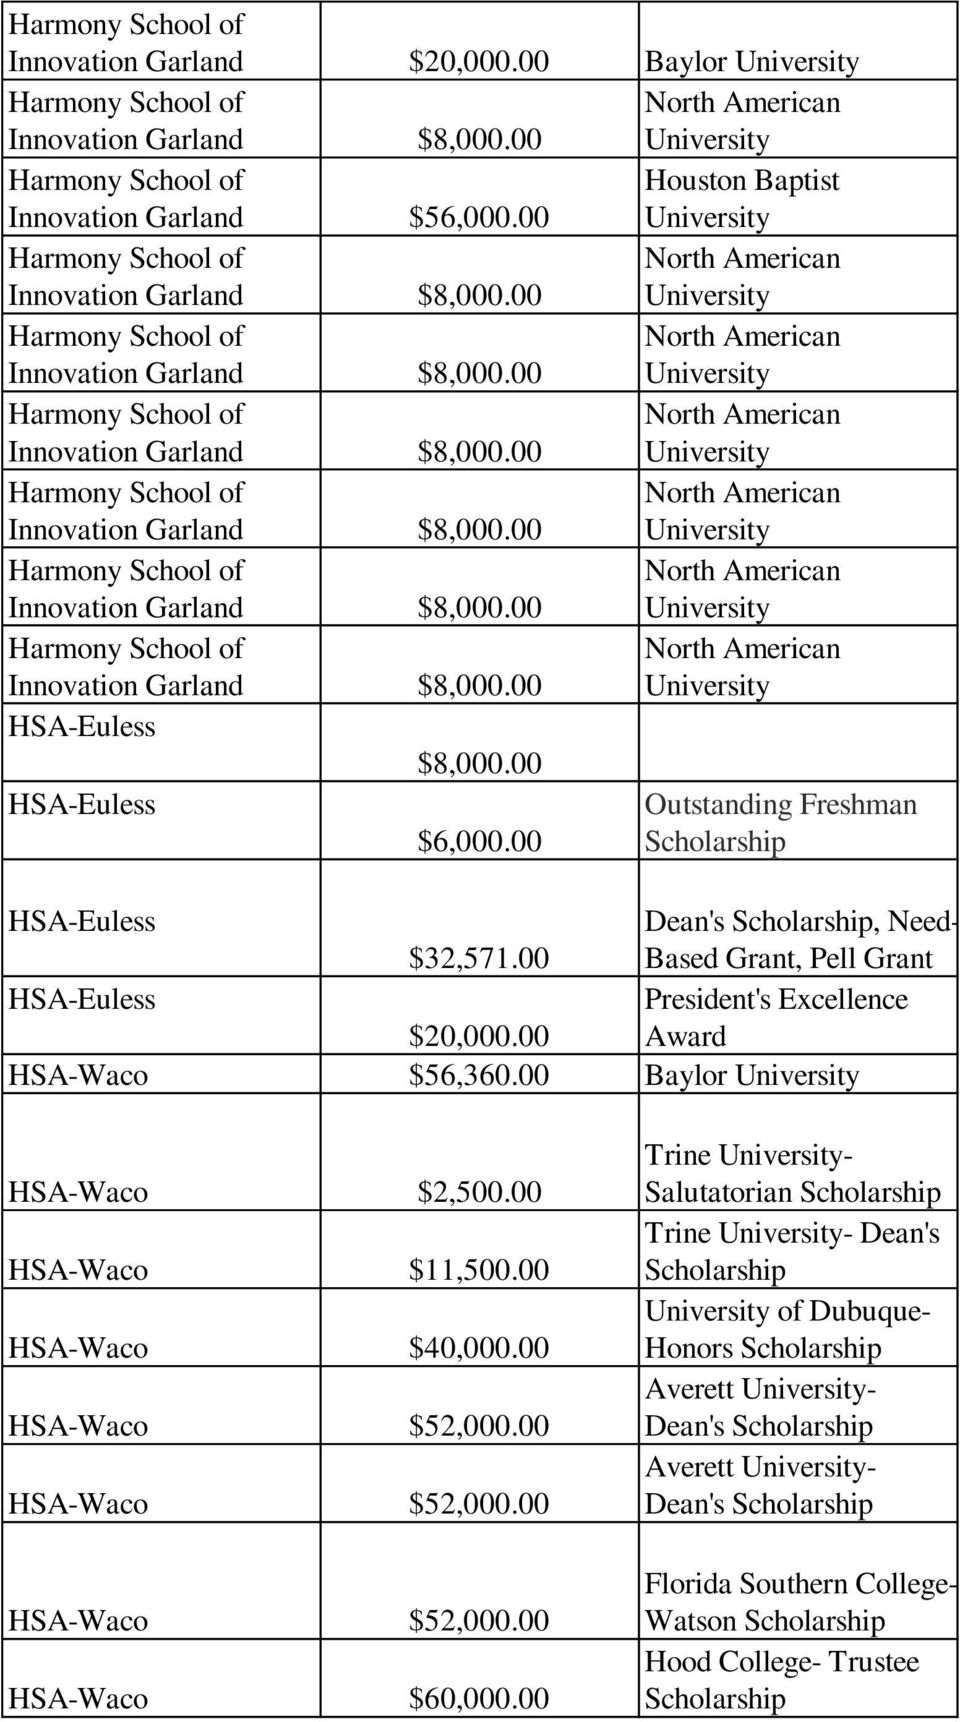 00 Outstanding Freshman HSA-Euless Dean's, Need- $32,571.00 Based Grant, Pell Grant HSA-Euless President's Excellence $20,000.00 Award HSA-Waco $56,360.00 Baylor HSA-Waco $2,500.